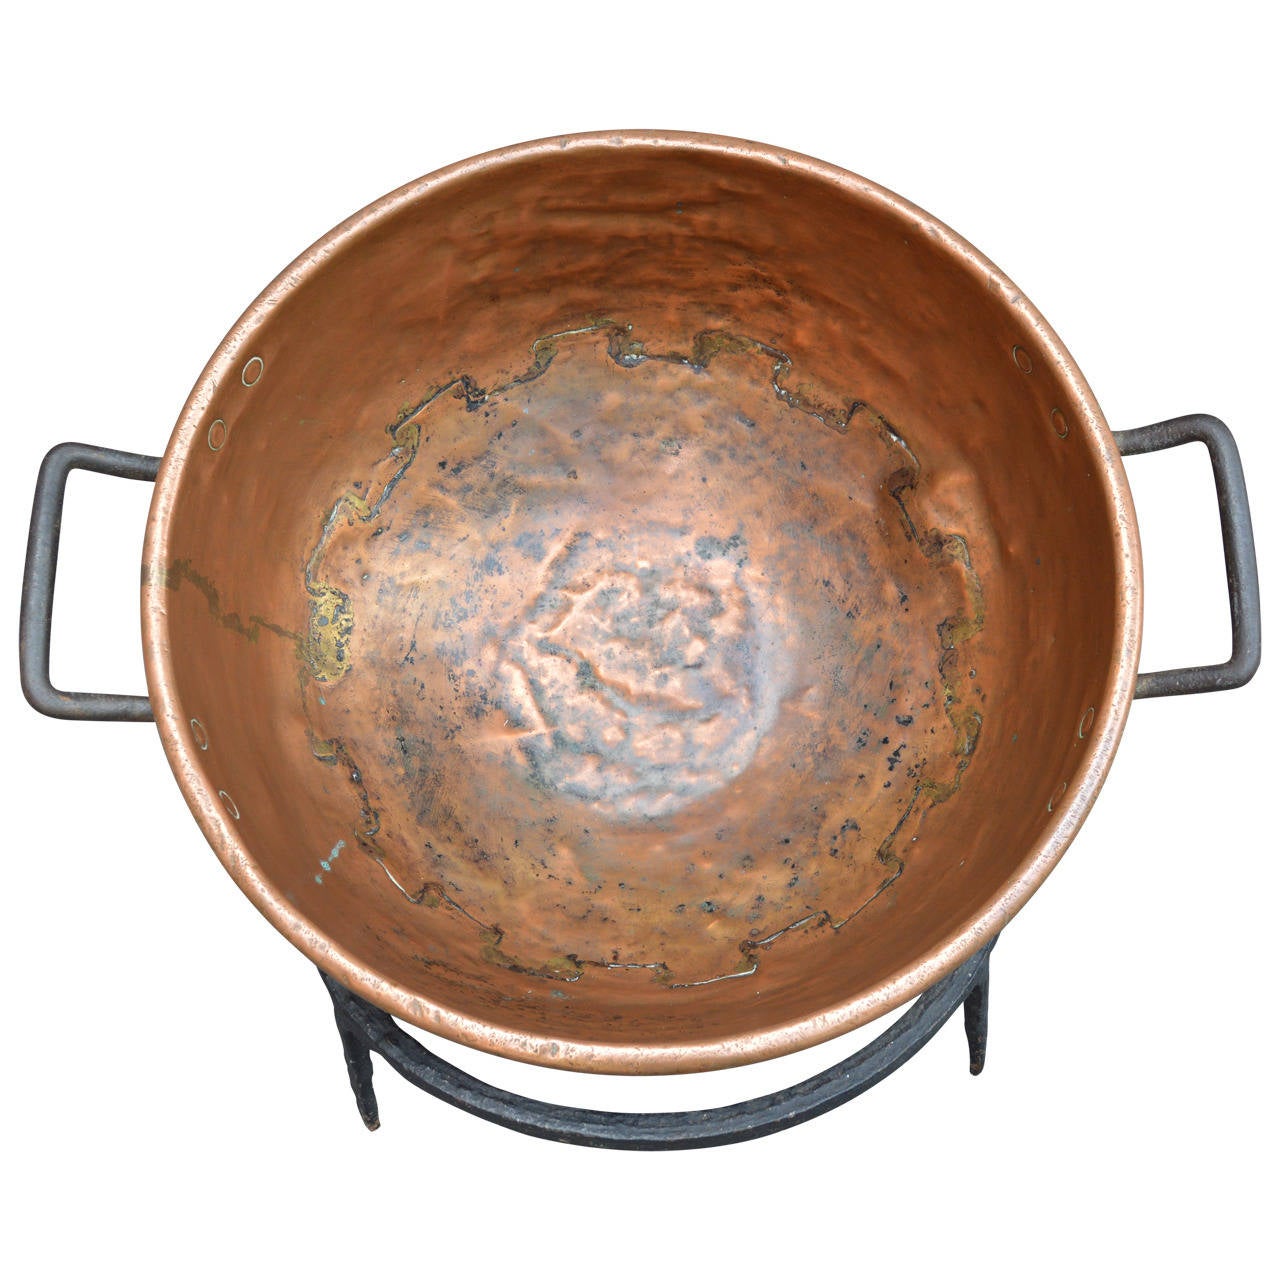 Large beautifully hammered copper cauldron with hand-forged iron base. Has a very nice patina due to history.